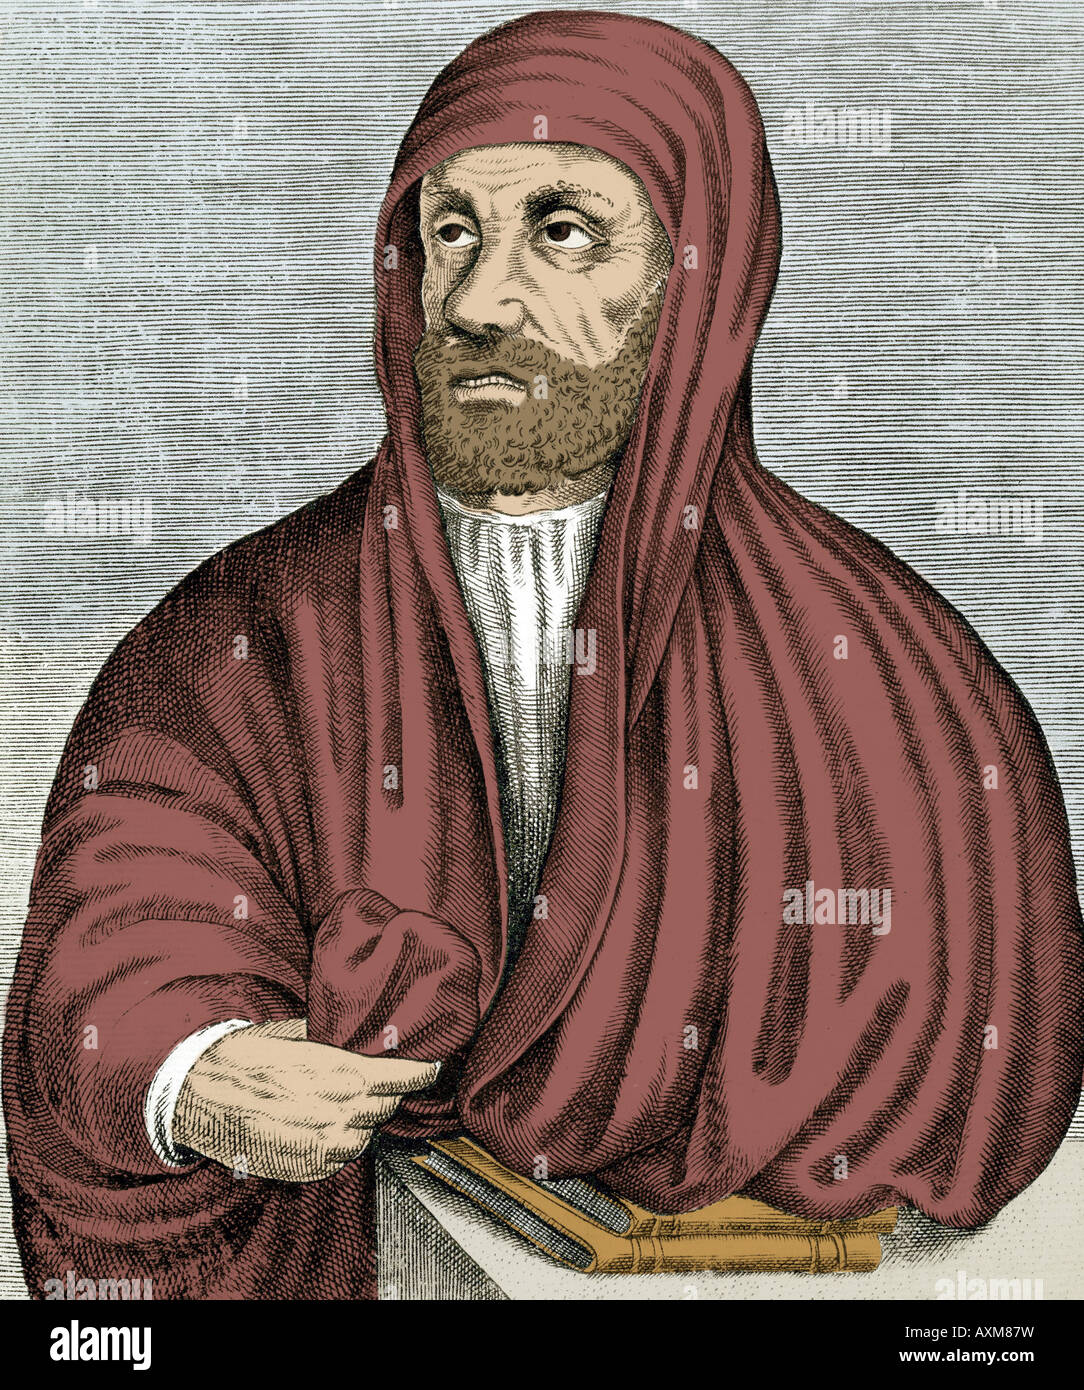 Ibn Sina also known as Avicenna (980 -  1037) was a Persian Muslim philosopher, physician and scientist. Stock Photo